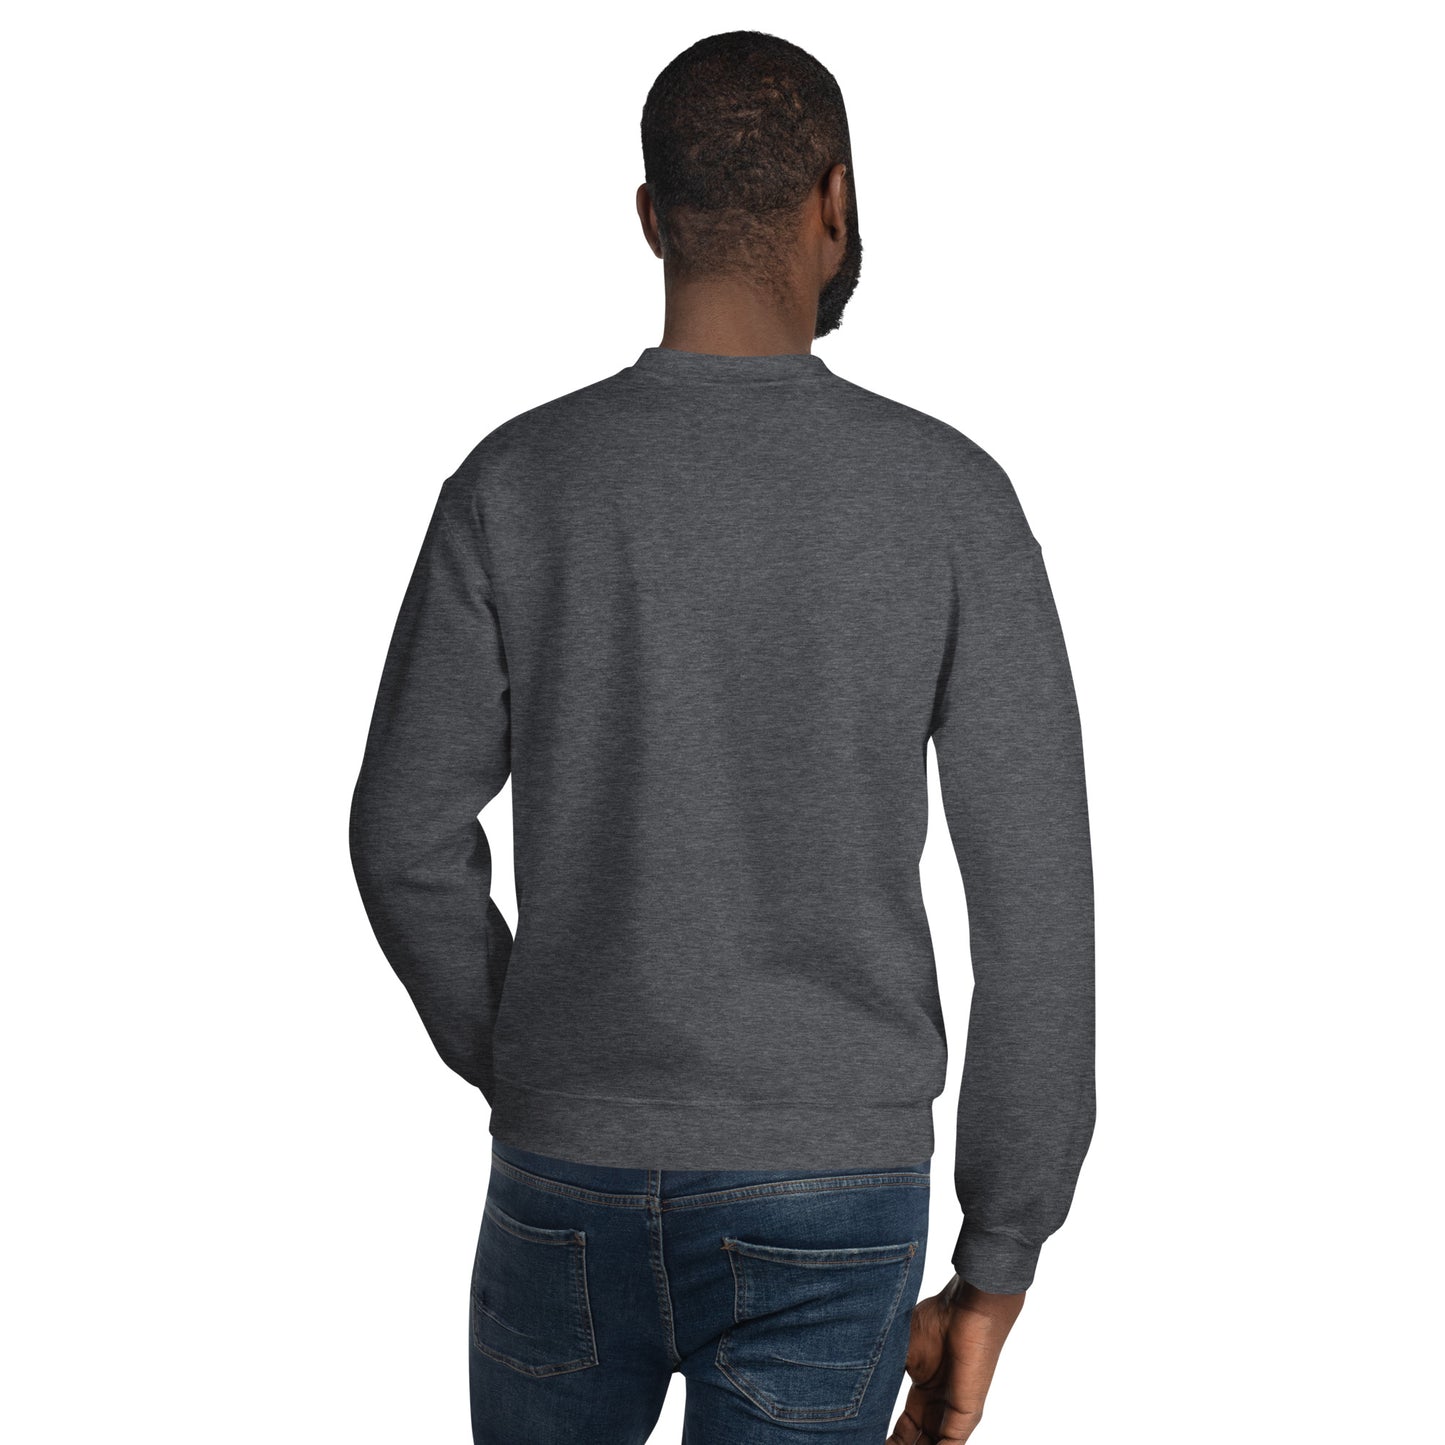 man showing back of dark grey sweatshirt with white text reading harlem hellfighters